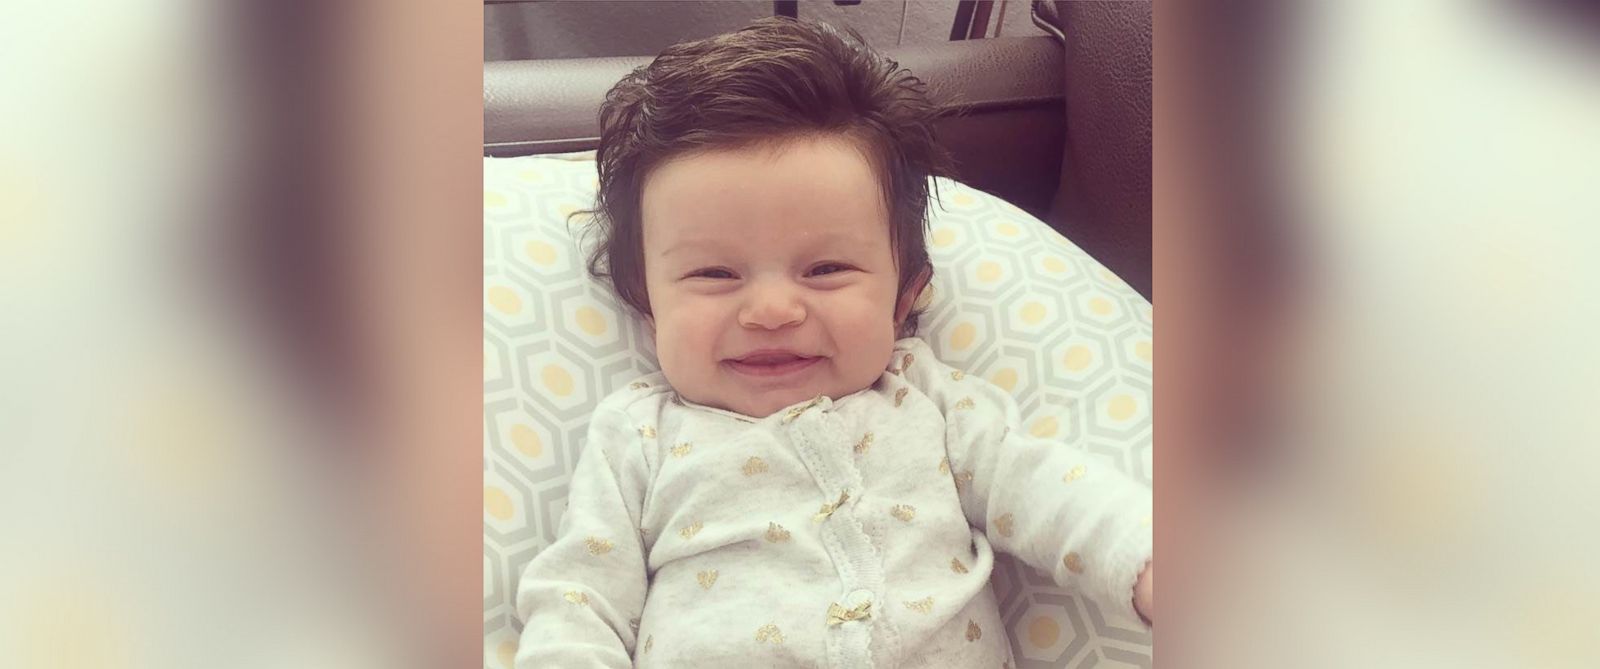 PHOTO: Two-month old Isabelle Kaplan has become an Internet sensation for her unusually full head of hair.